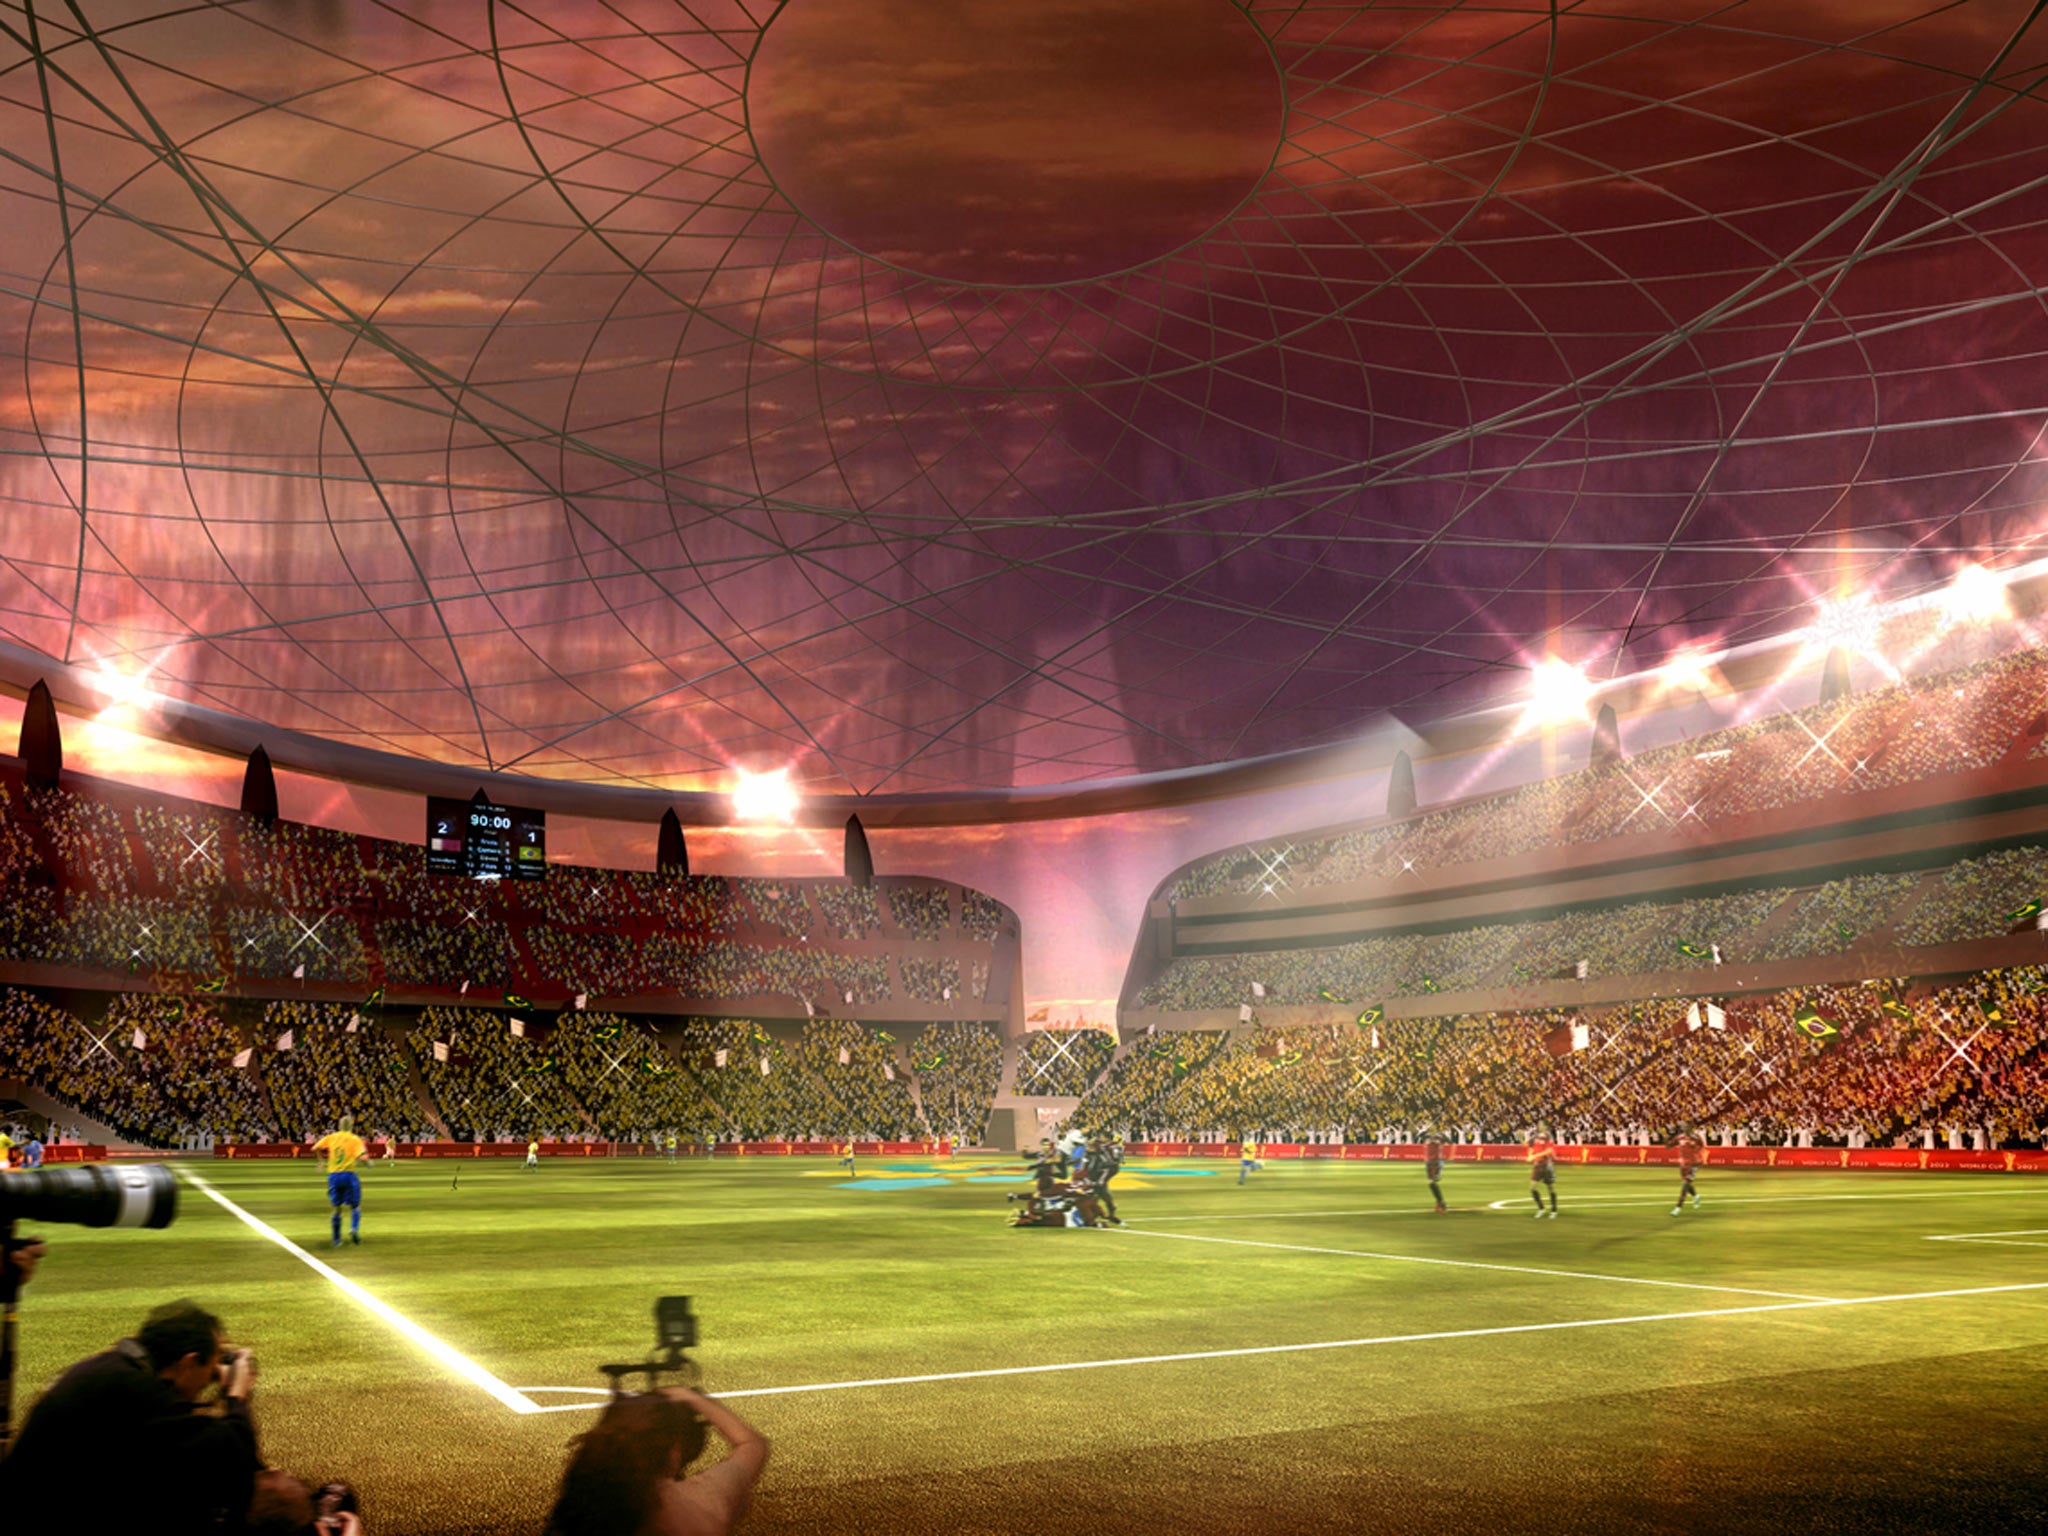 The artists' impressions of Qatar stadia are sexy, but the issues seem to no longer be